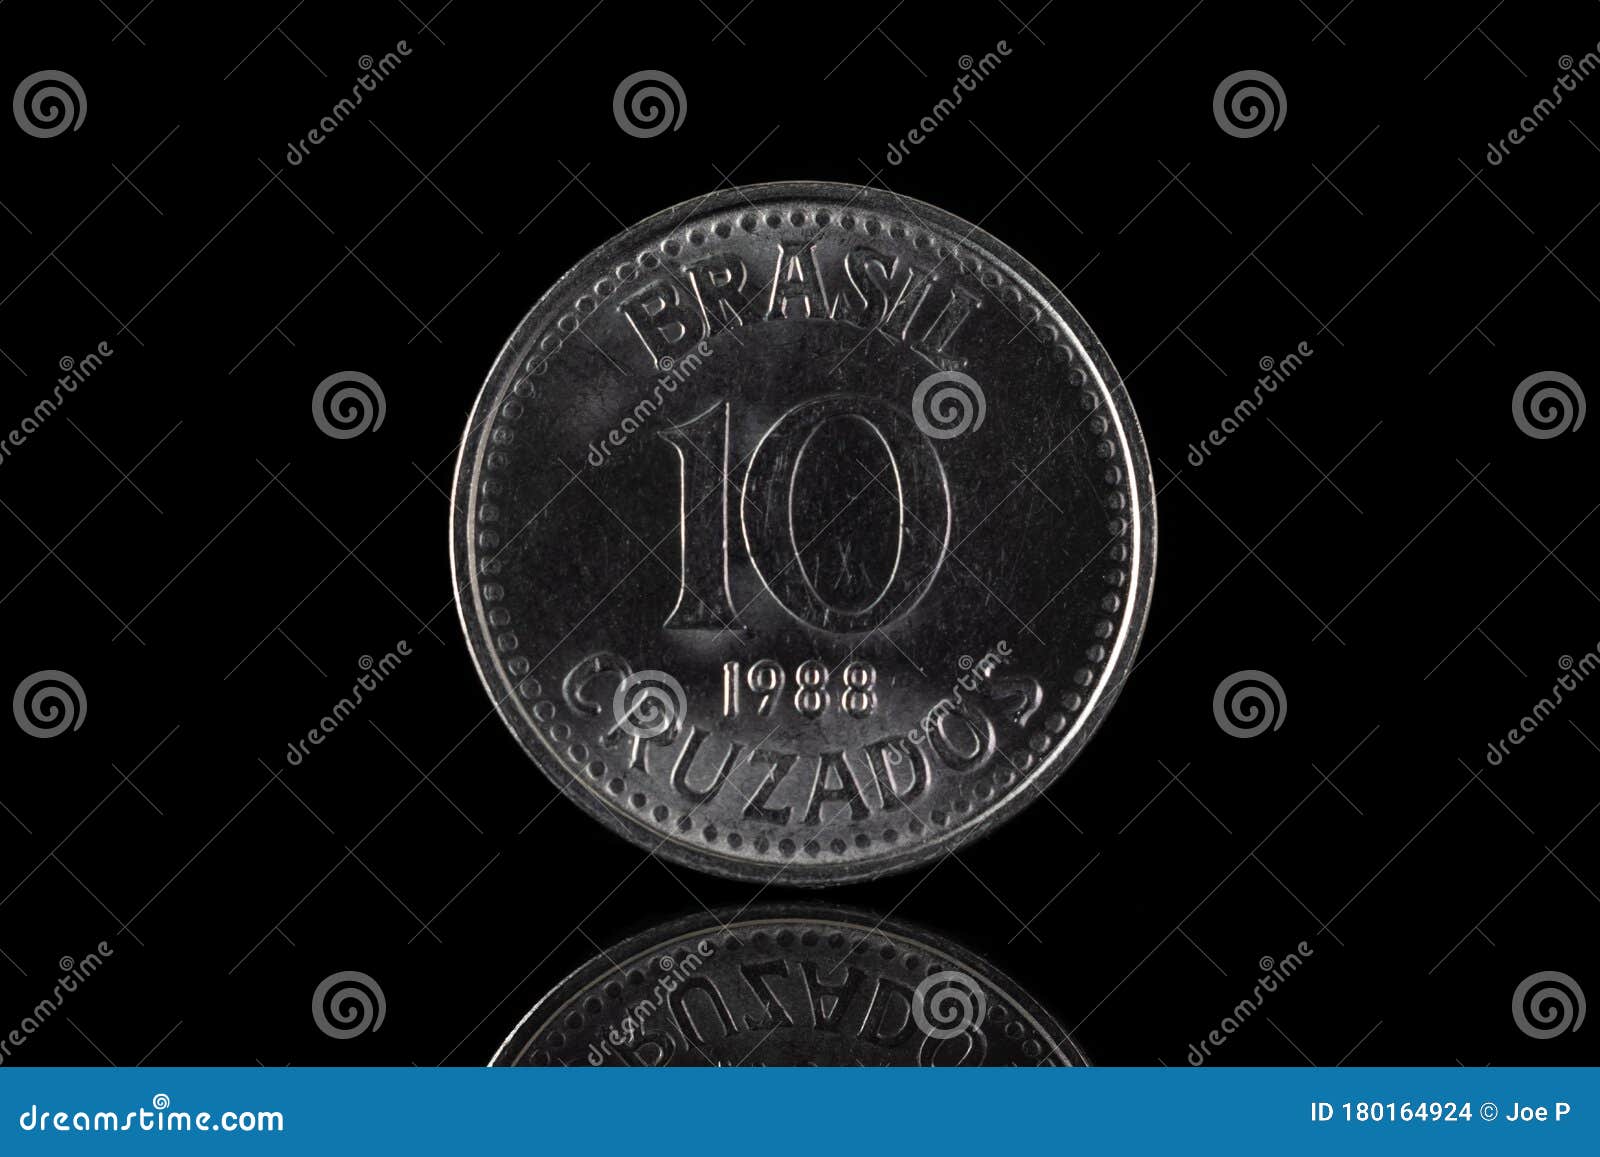 10 brazil cruzados coin from 1988  on black